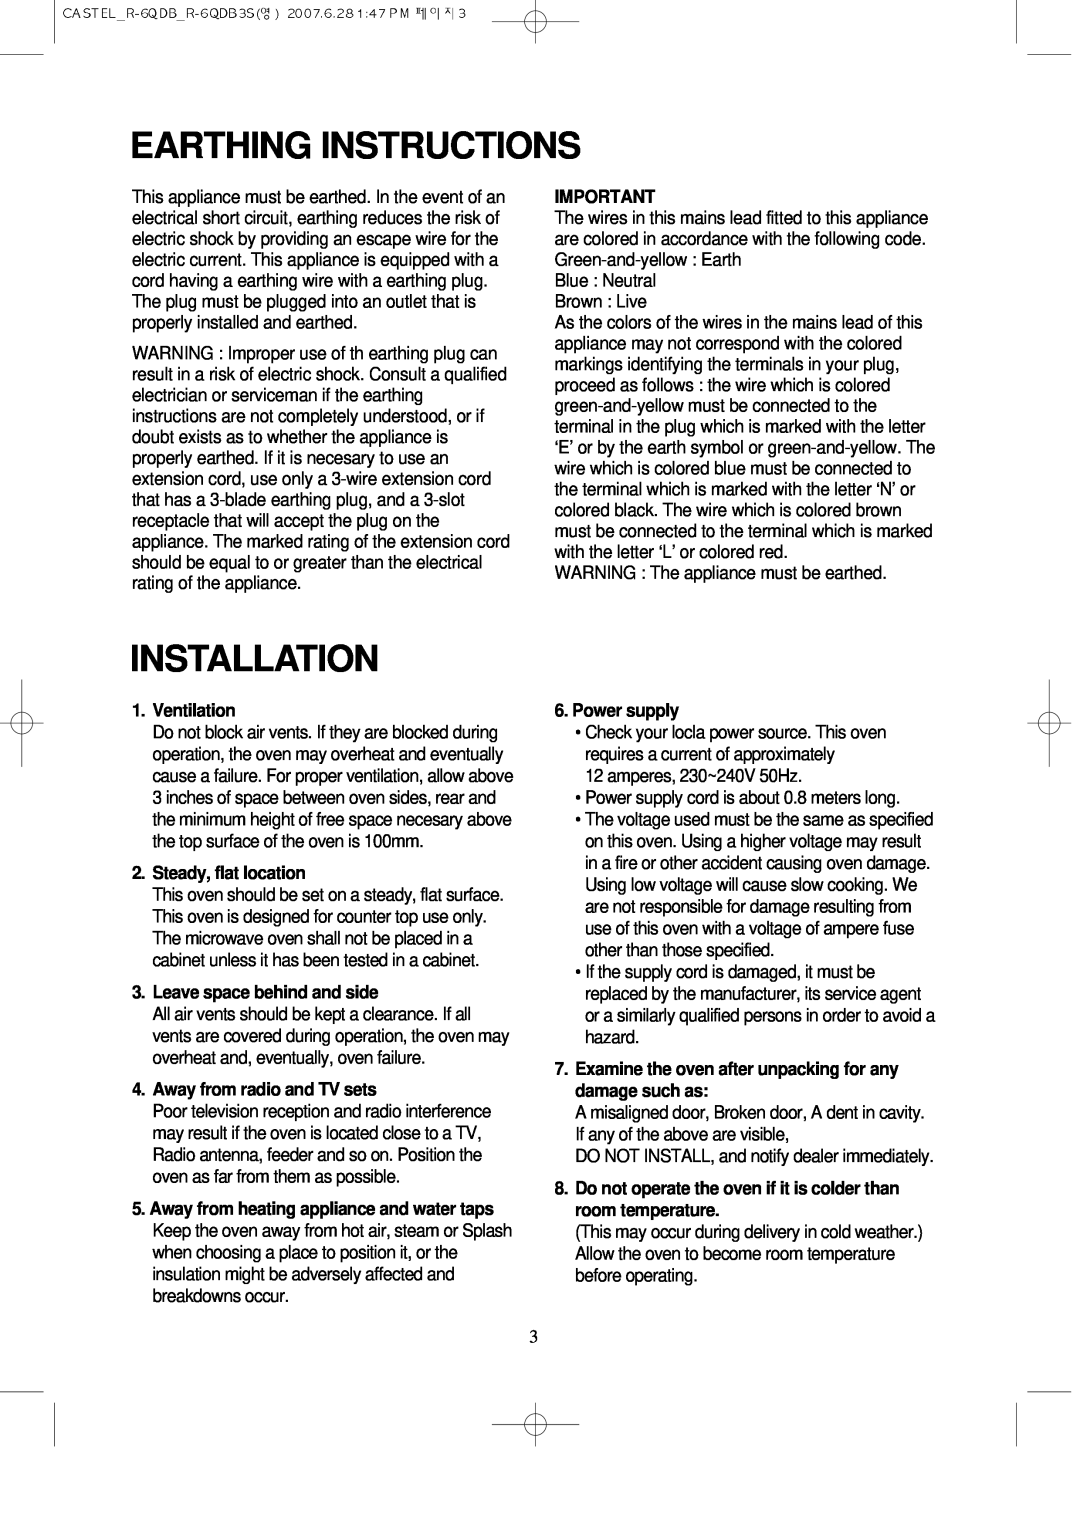 Daewoo KOR-6QDB manual Earthing Instructions, Installation, Ventilation, Steady, flat location, Leave space behind and side 